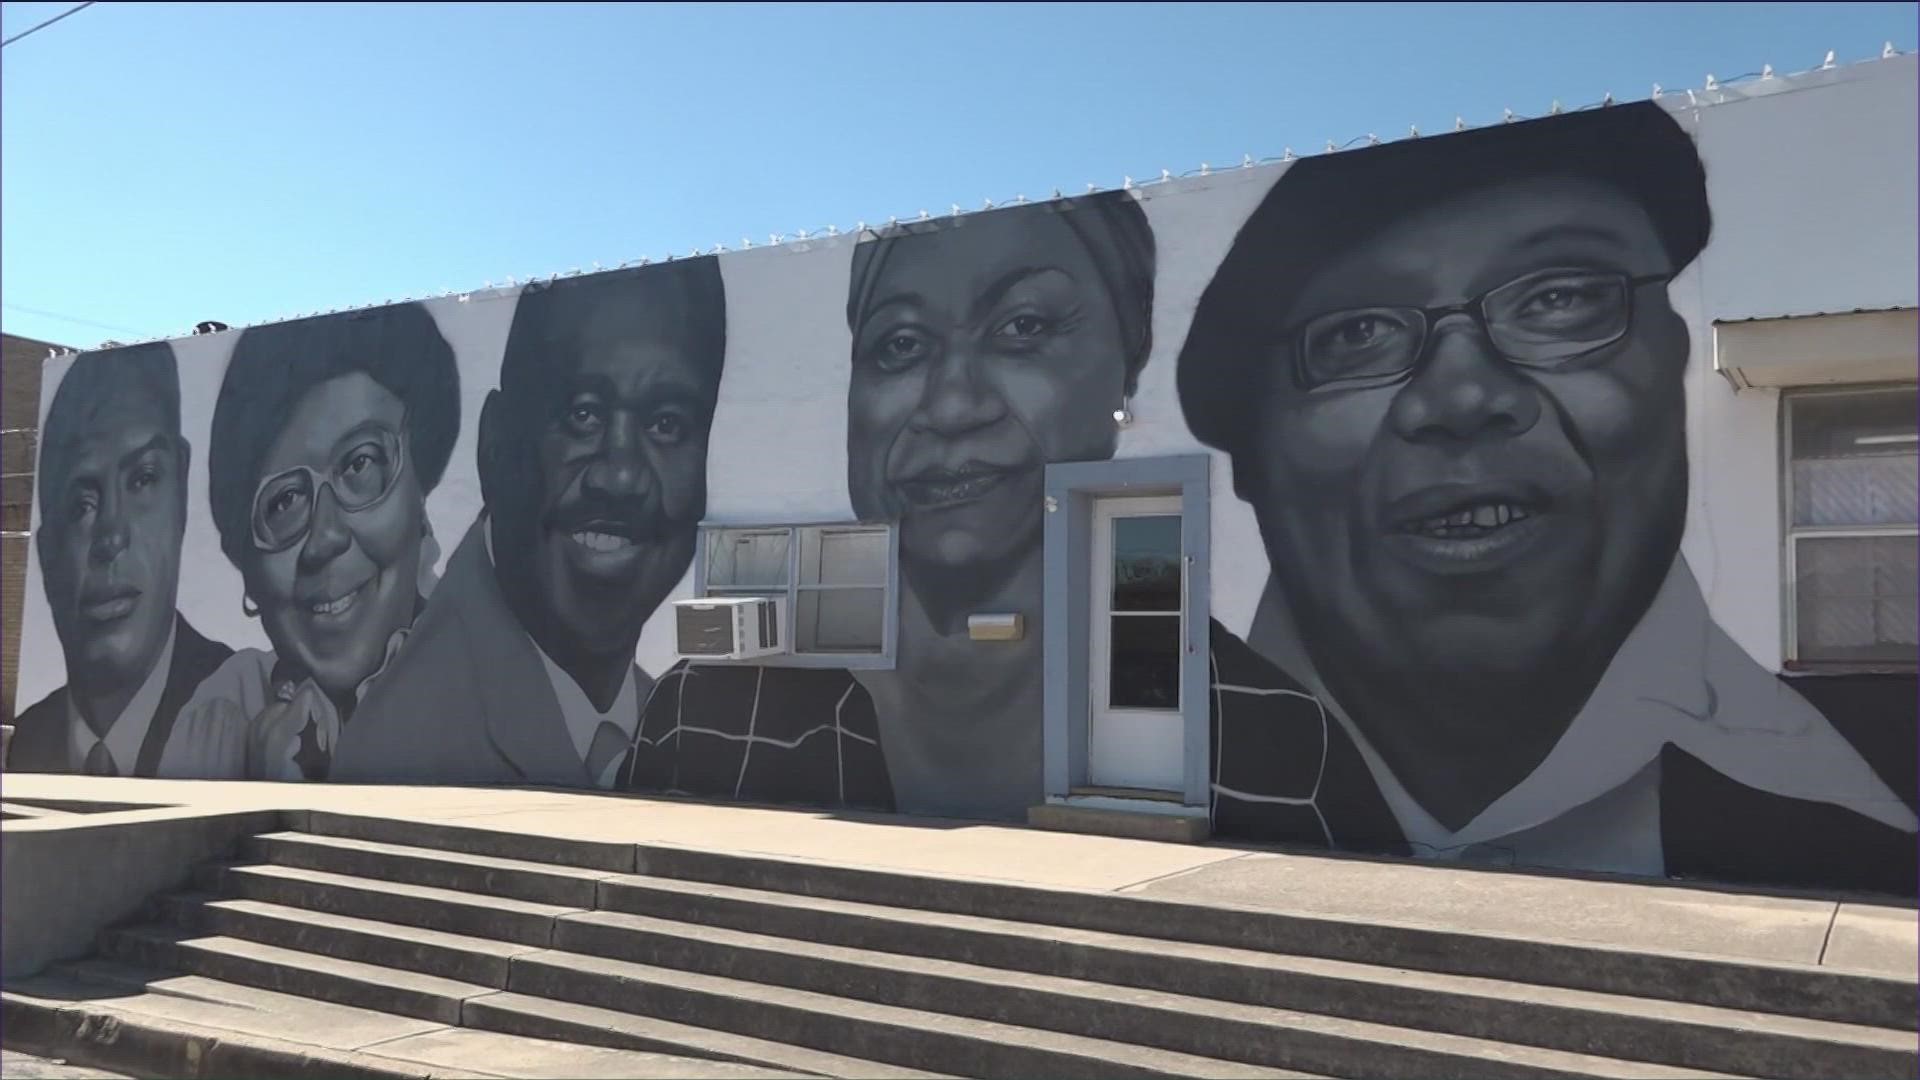 The mural is located at the corner of Main Street and Central Avenue and recognizes Black community leaders, both deceased and living.